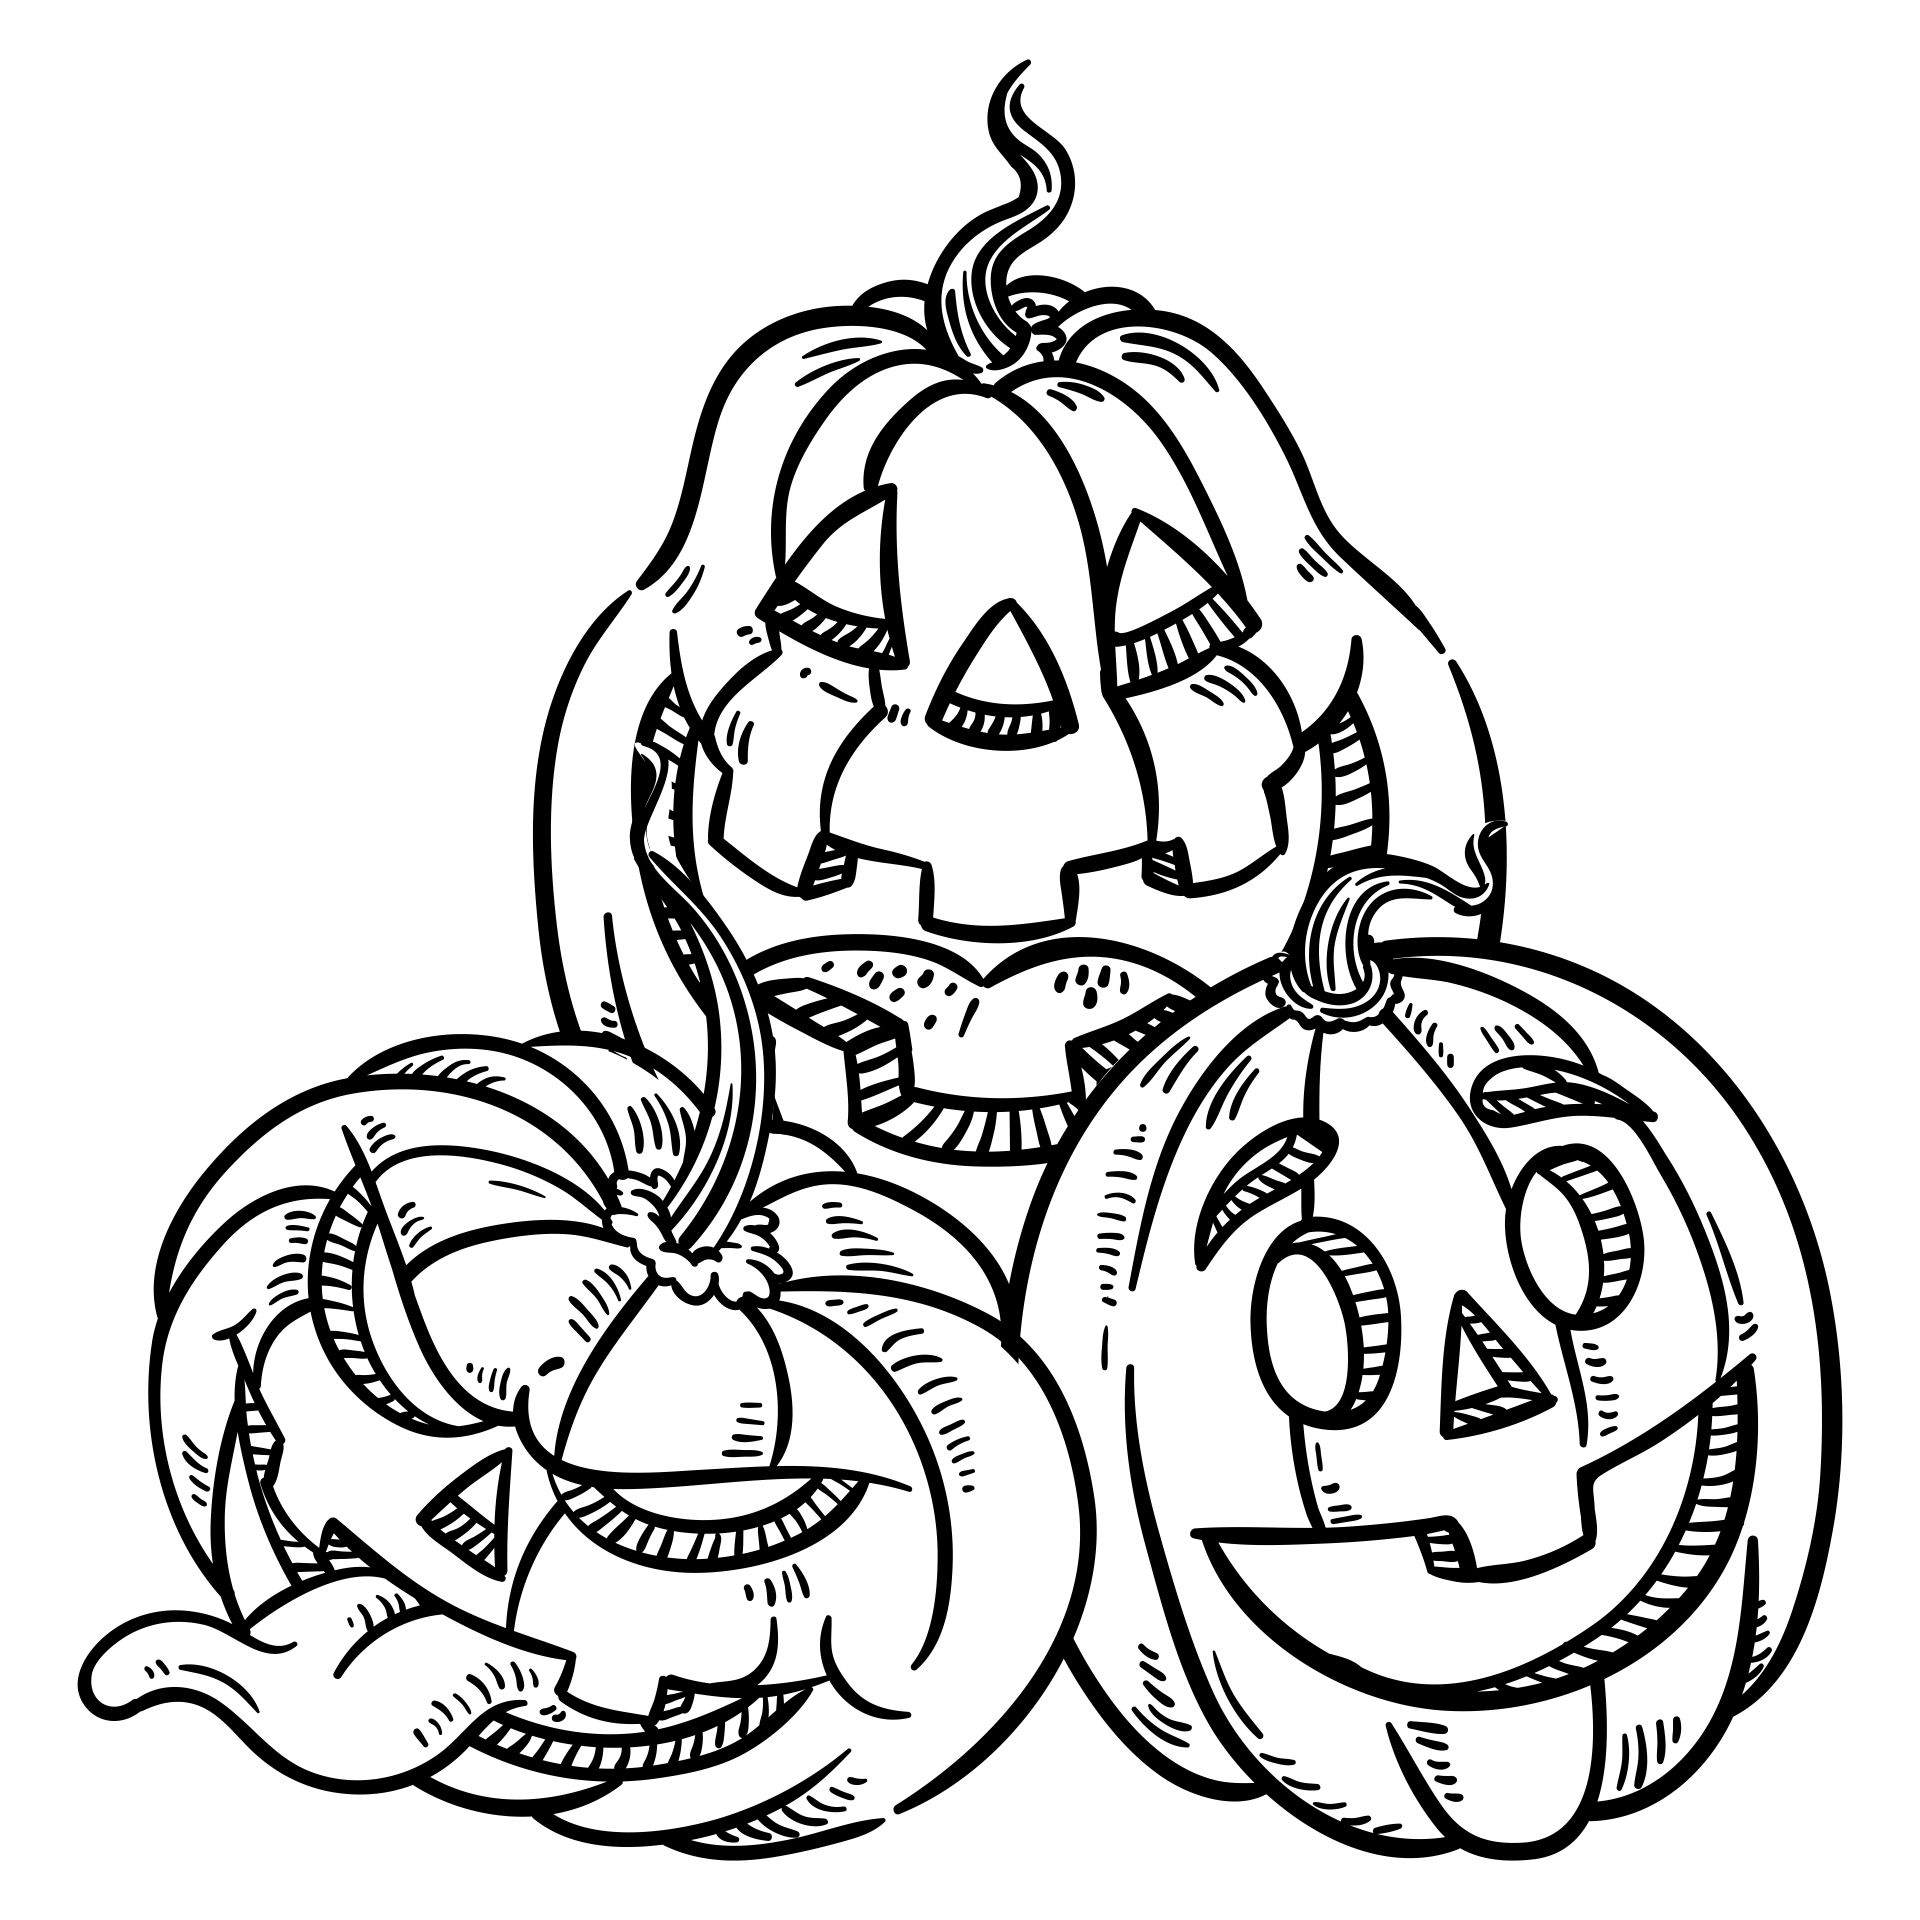 Halloween Scary Pumpkin Printable Halloween Adult Coloring Pages